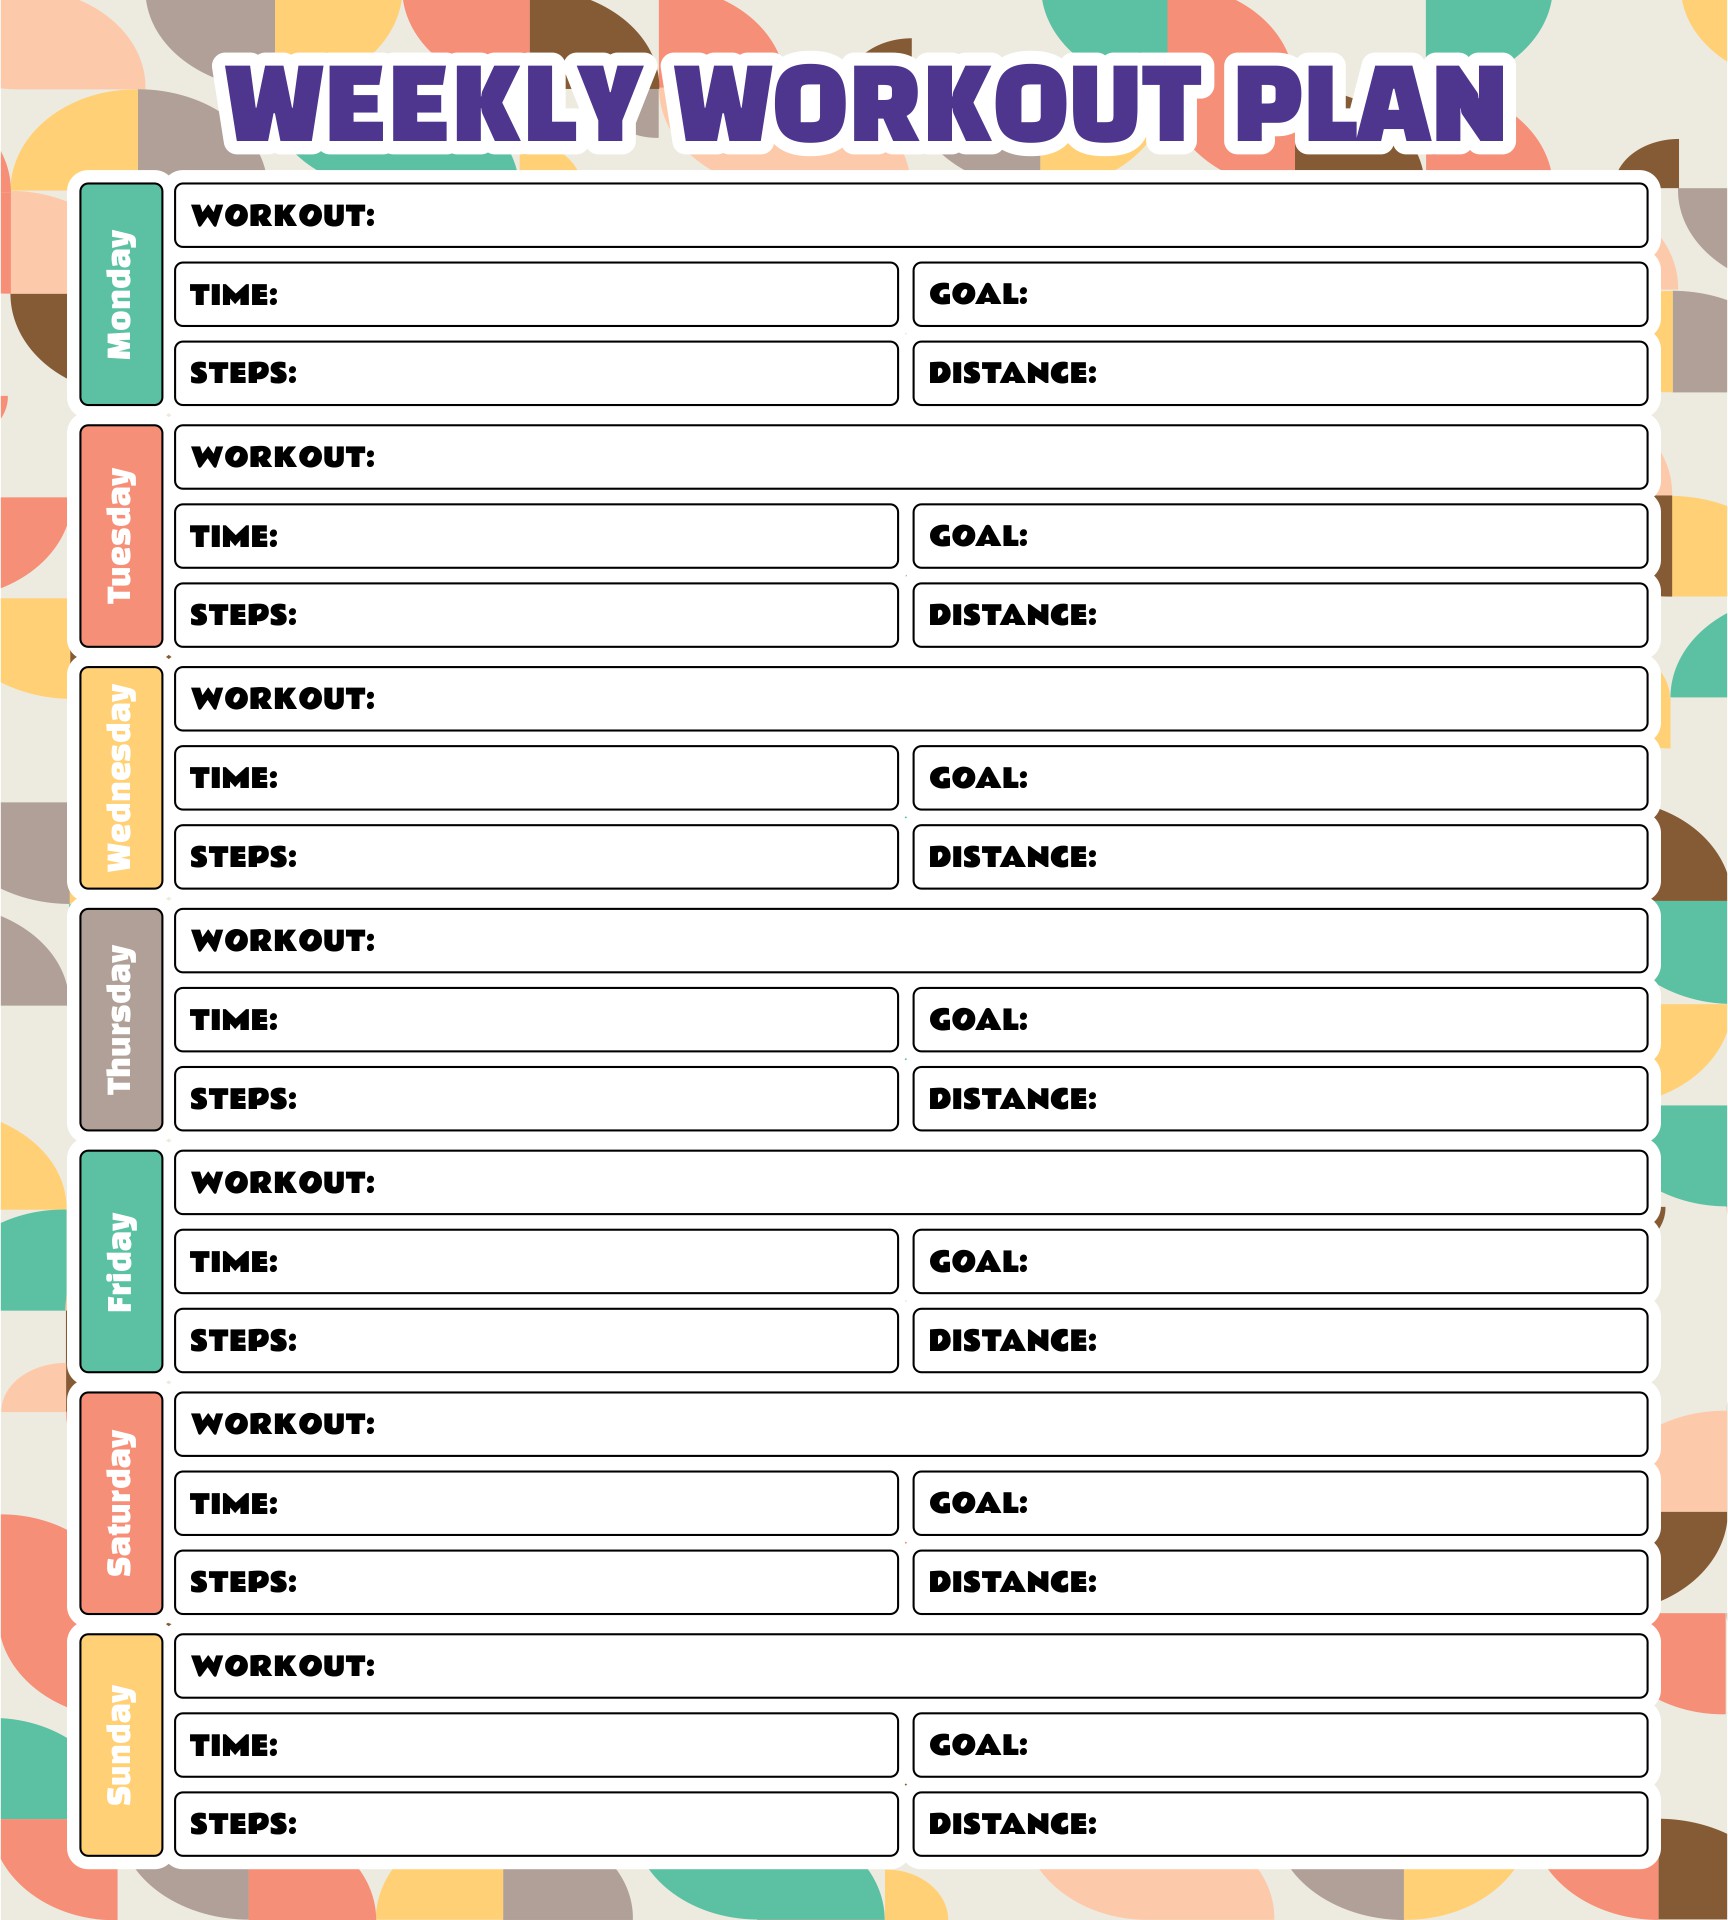 Weekly Workout Schedule For Men And Women Printable